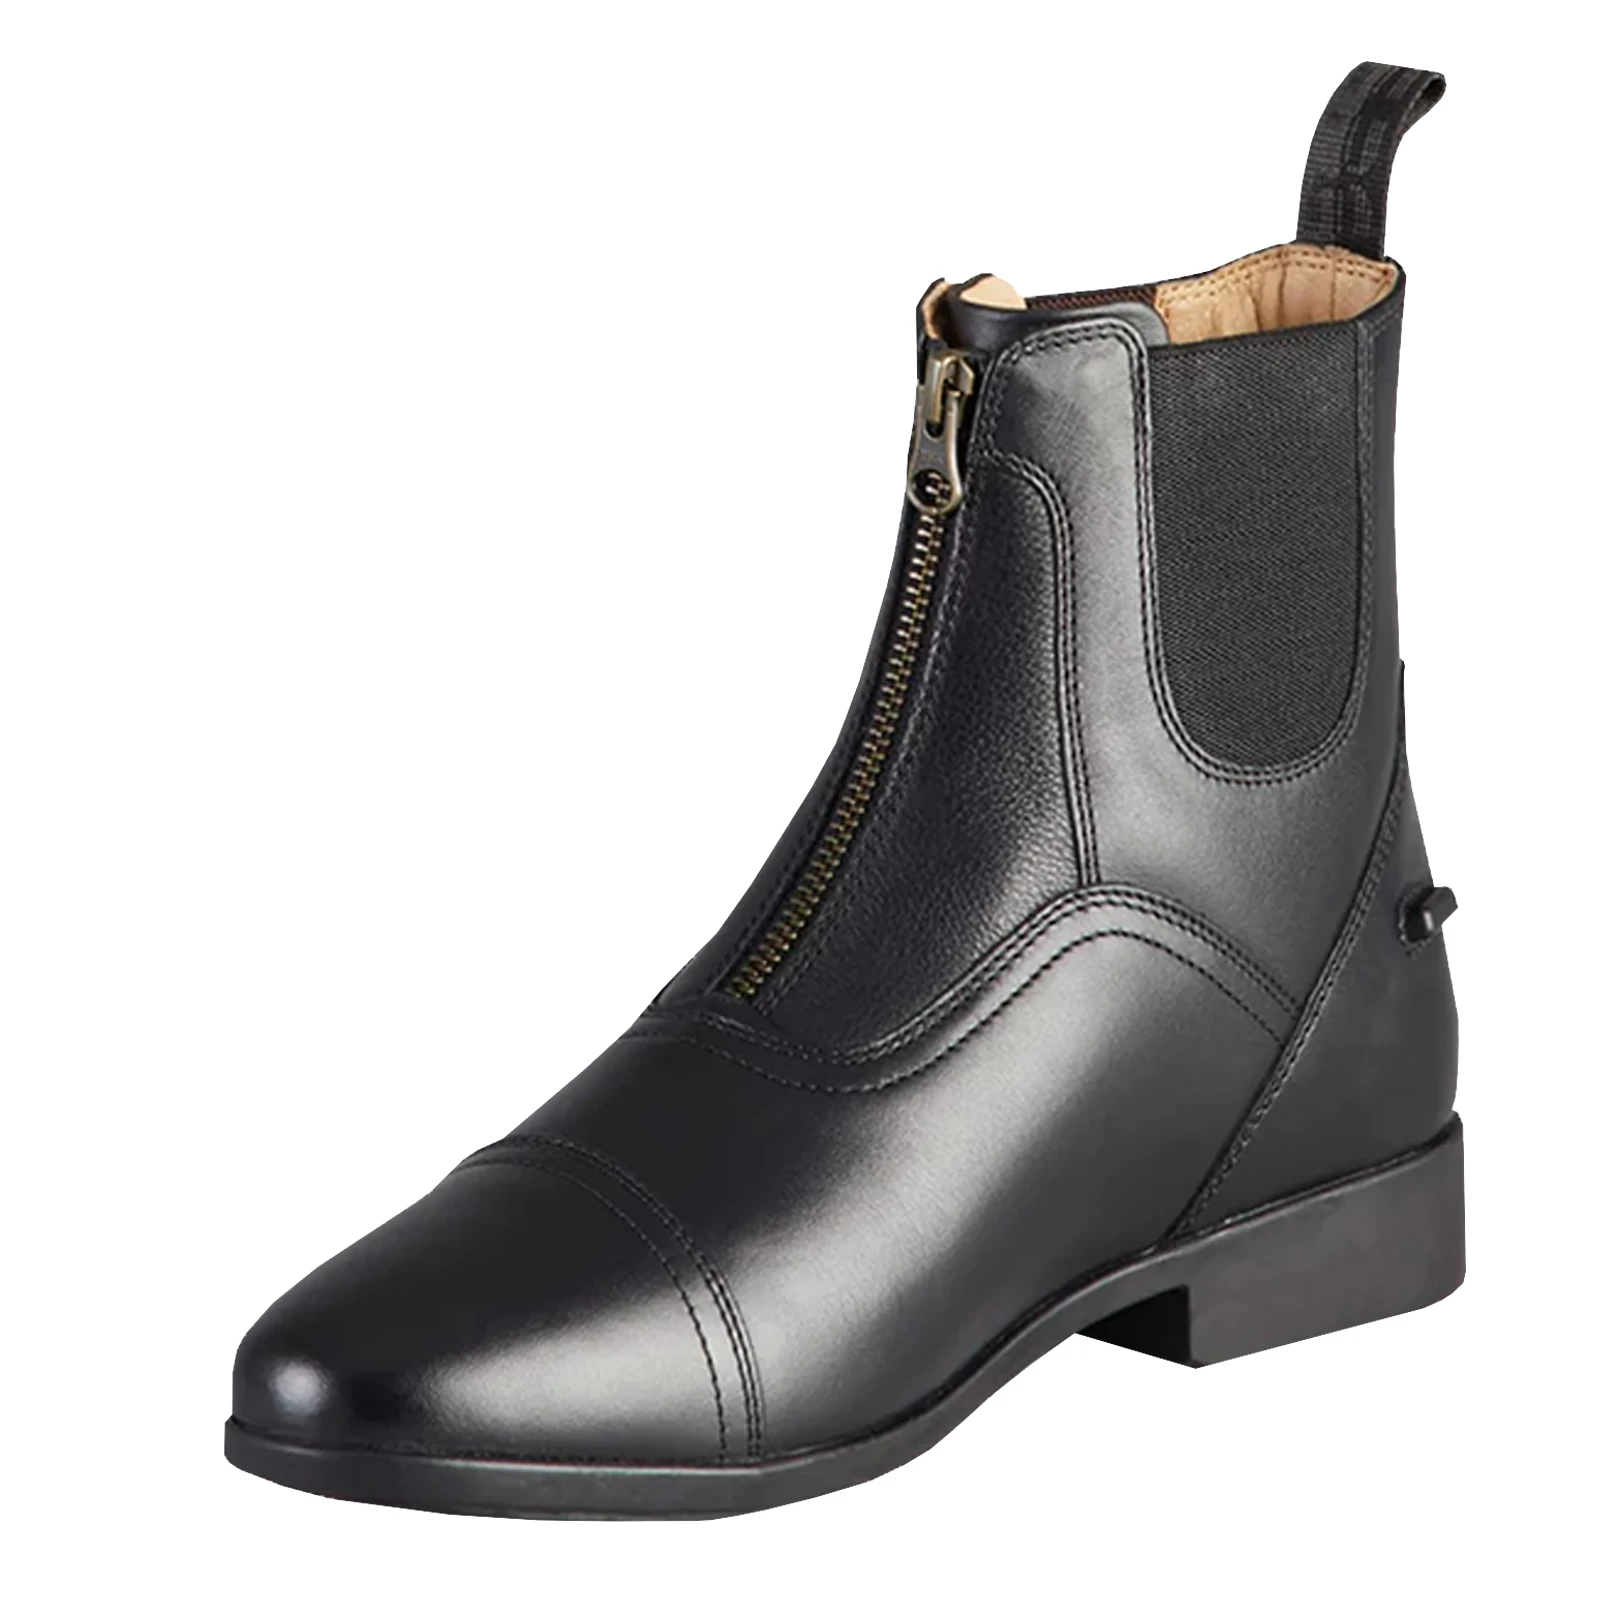 Premier Equine Virtus Leather Paddock Boot In Black 5027 - An All round Every...